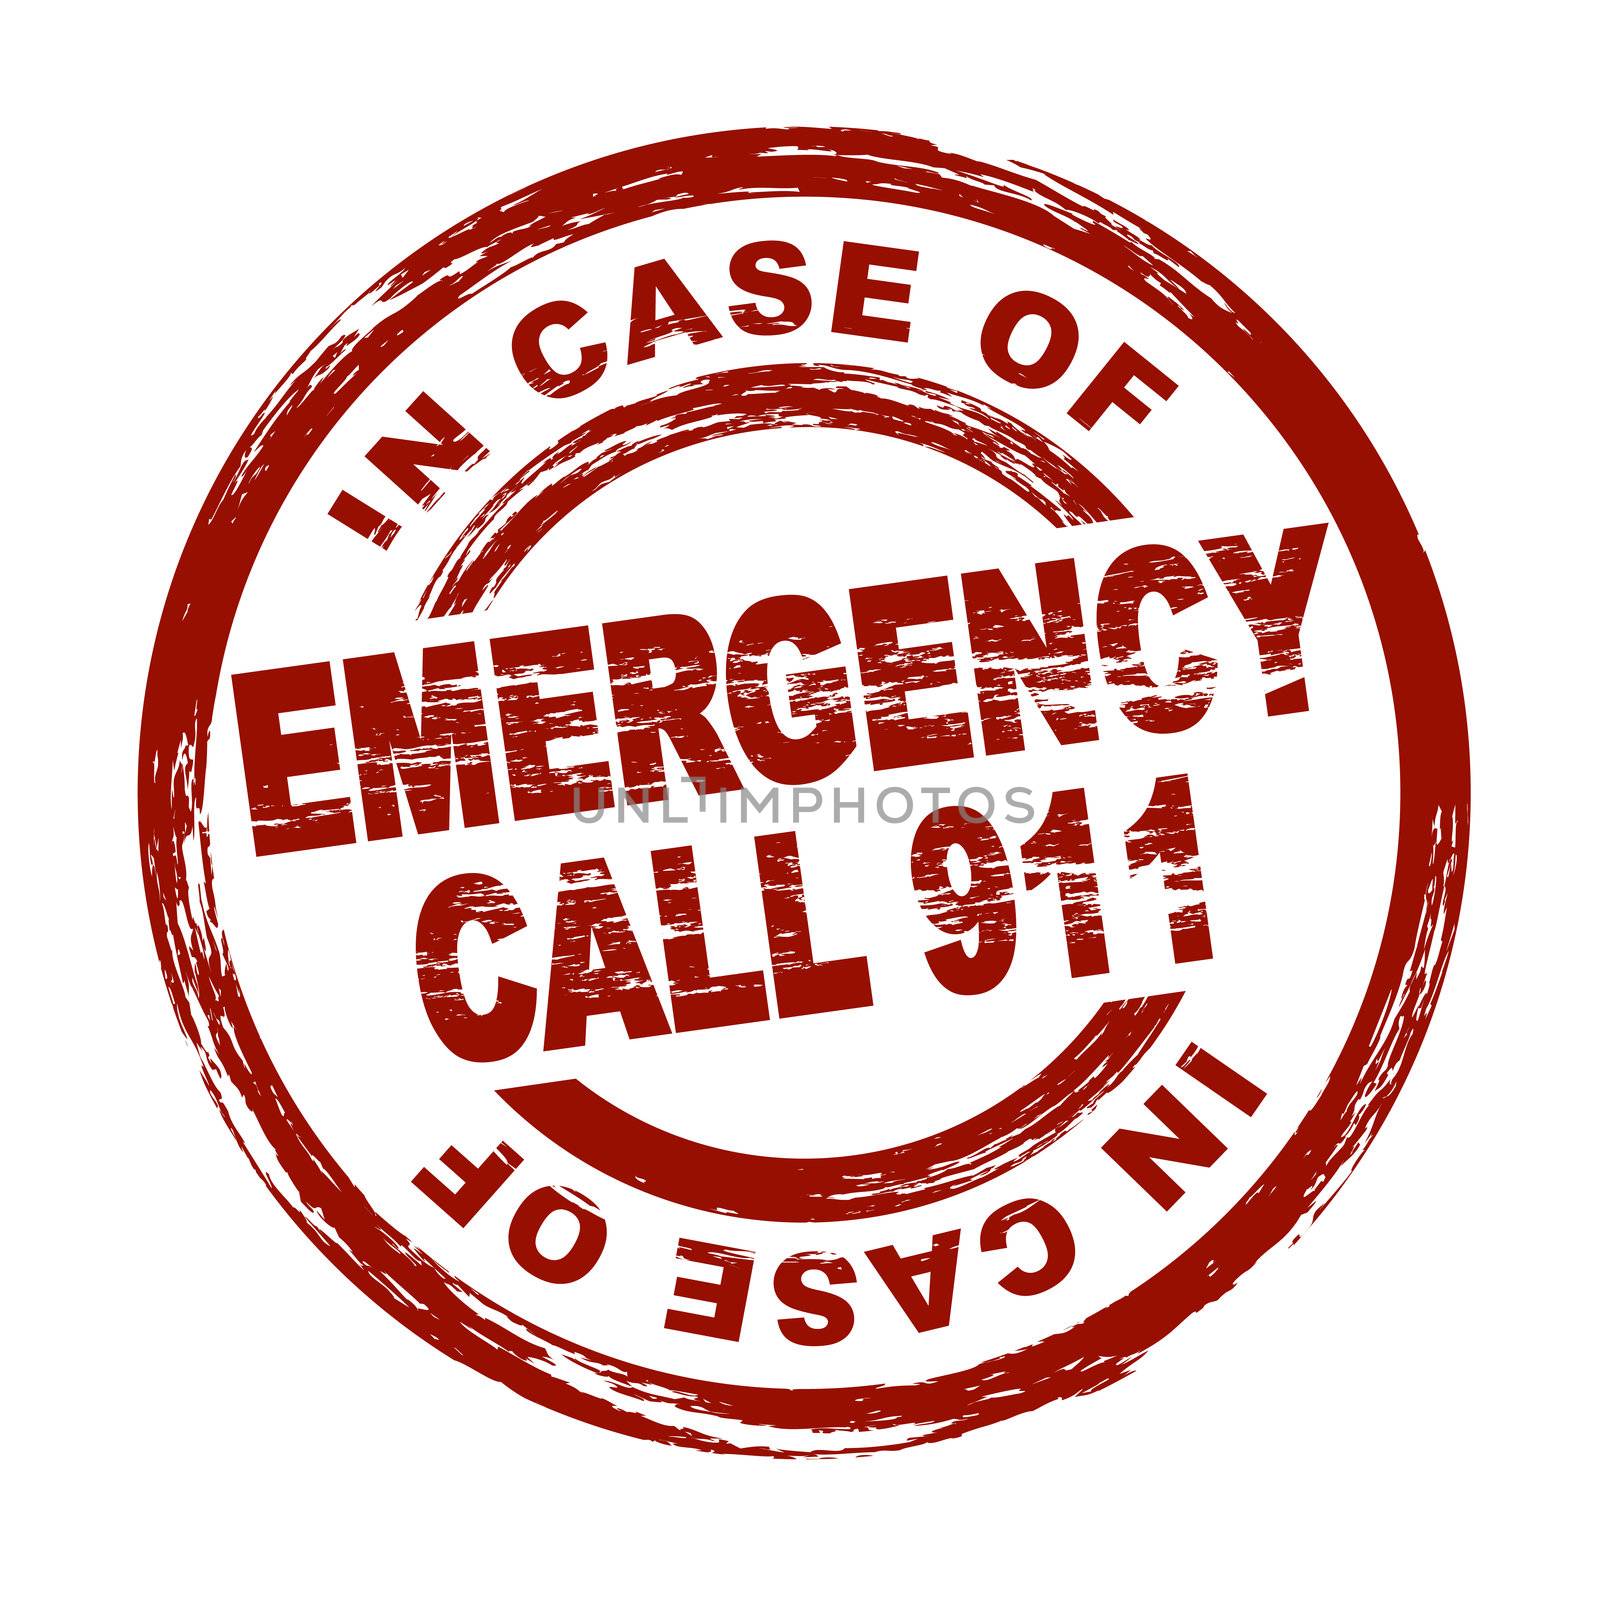 Stylized red stamp showing the term Emergency call 911. All on white background.